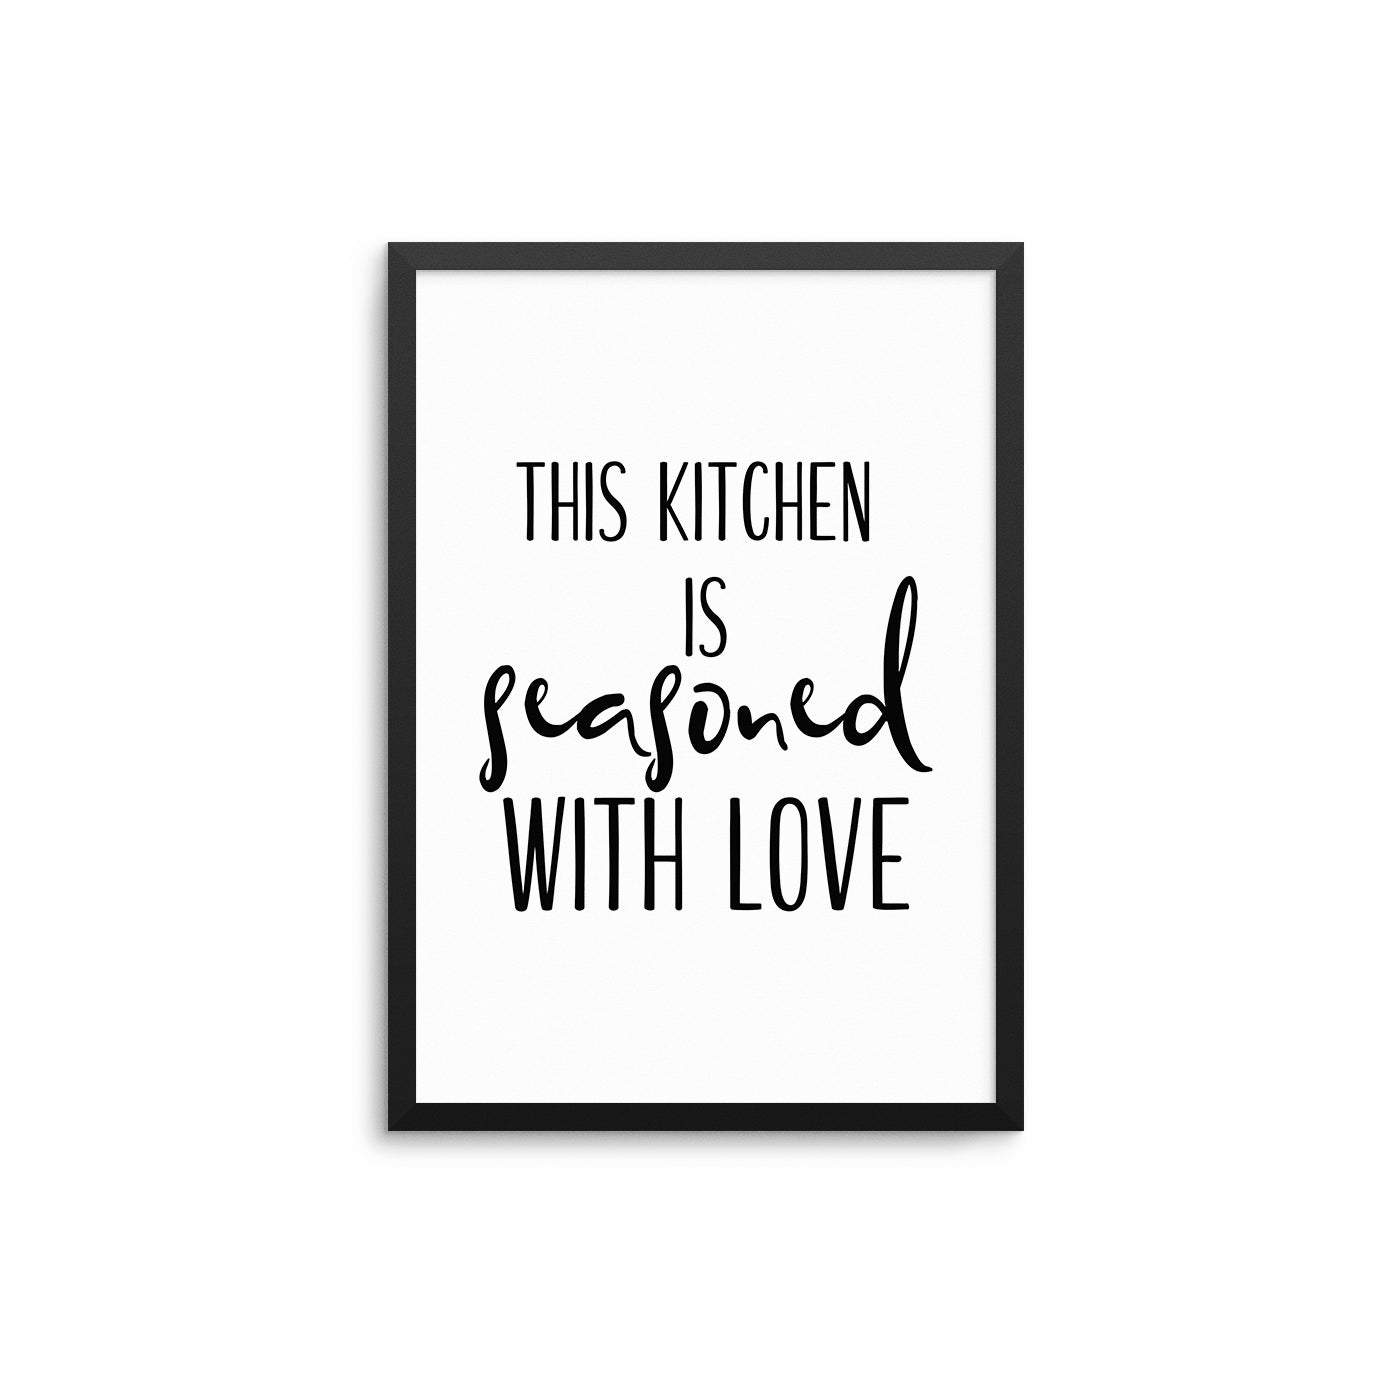 This Kitchen Is Seasoned With Love - D'Luxe Prints